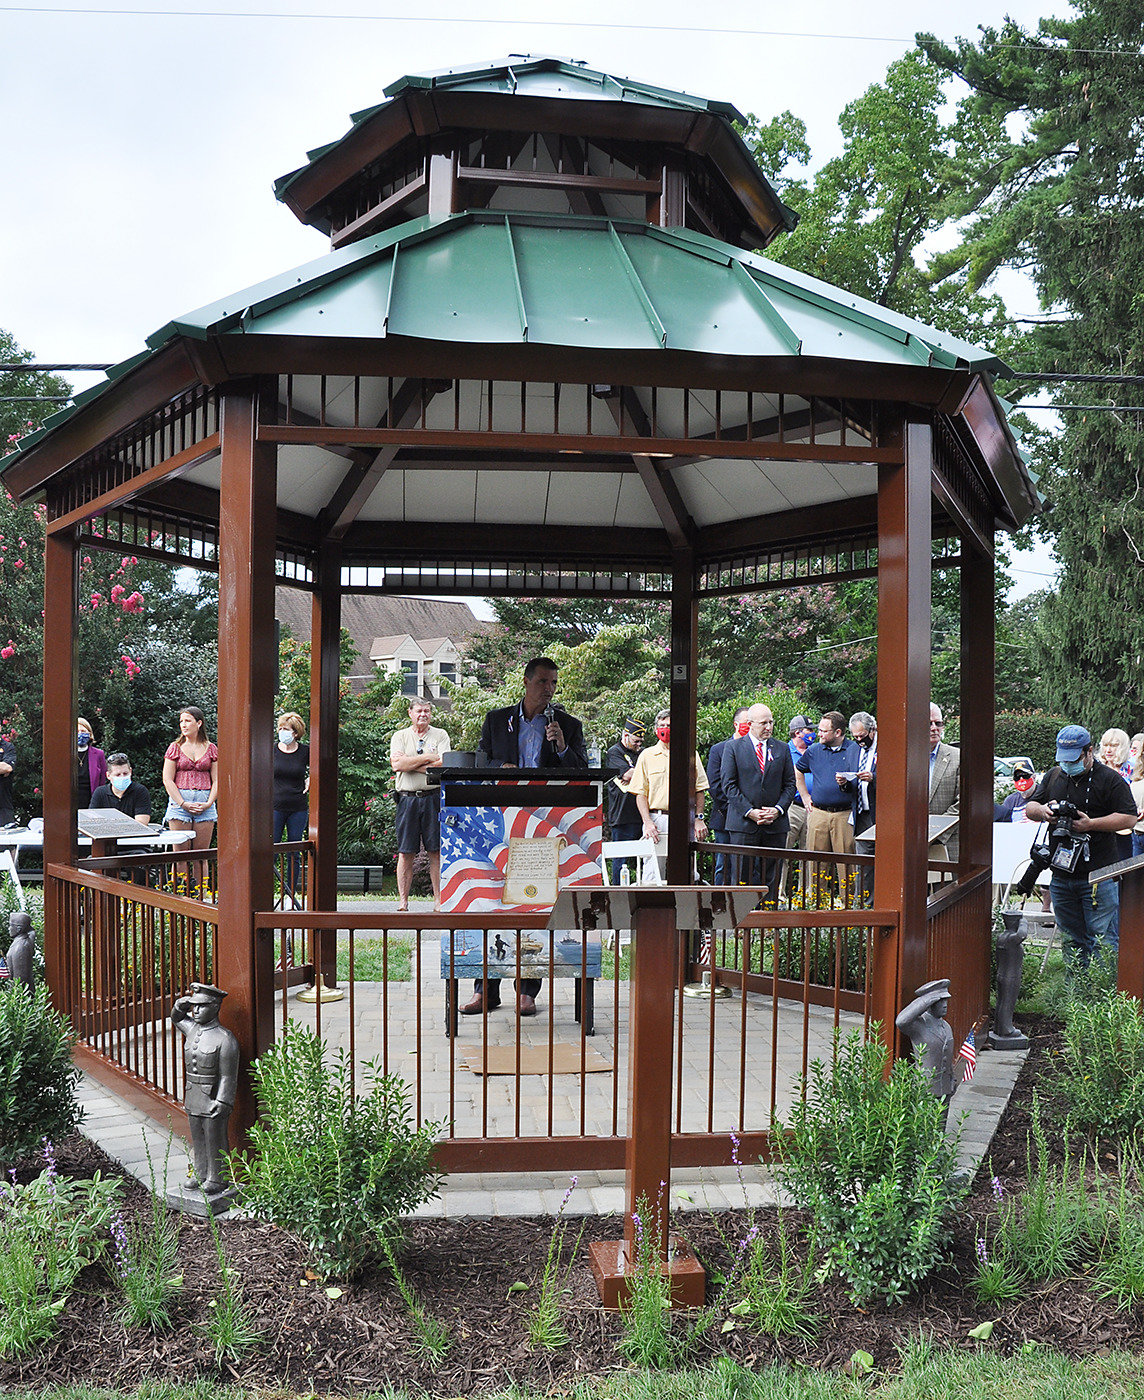 The Heroes of Severna Park organization wants to place a Vietnam veterans memorial next to the Gold Star gazebo that is located parallel to the B&A Trail.